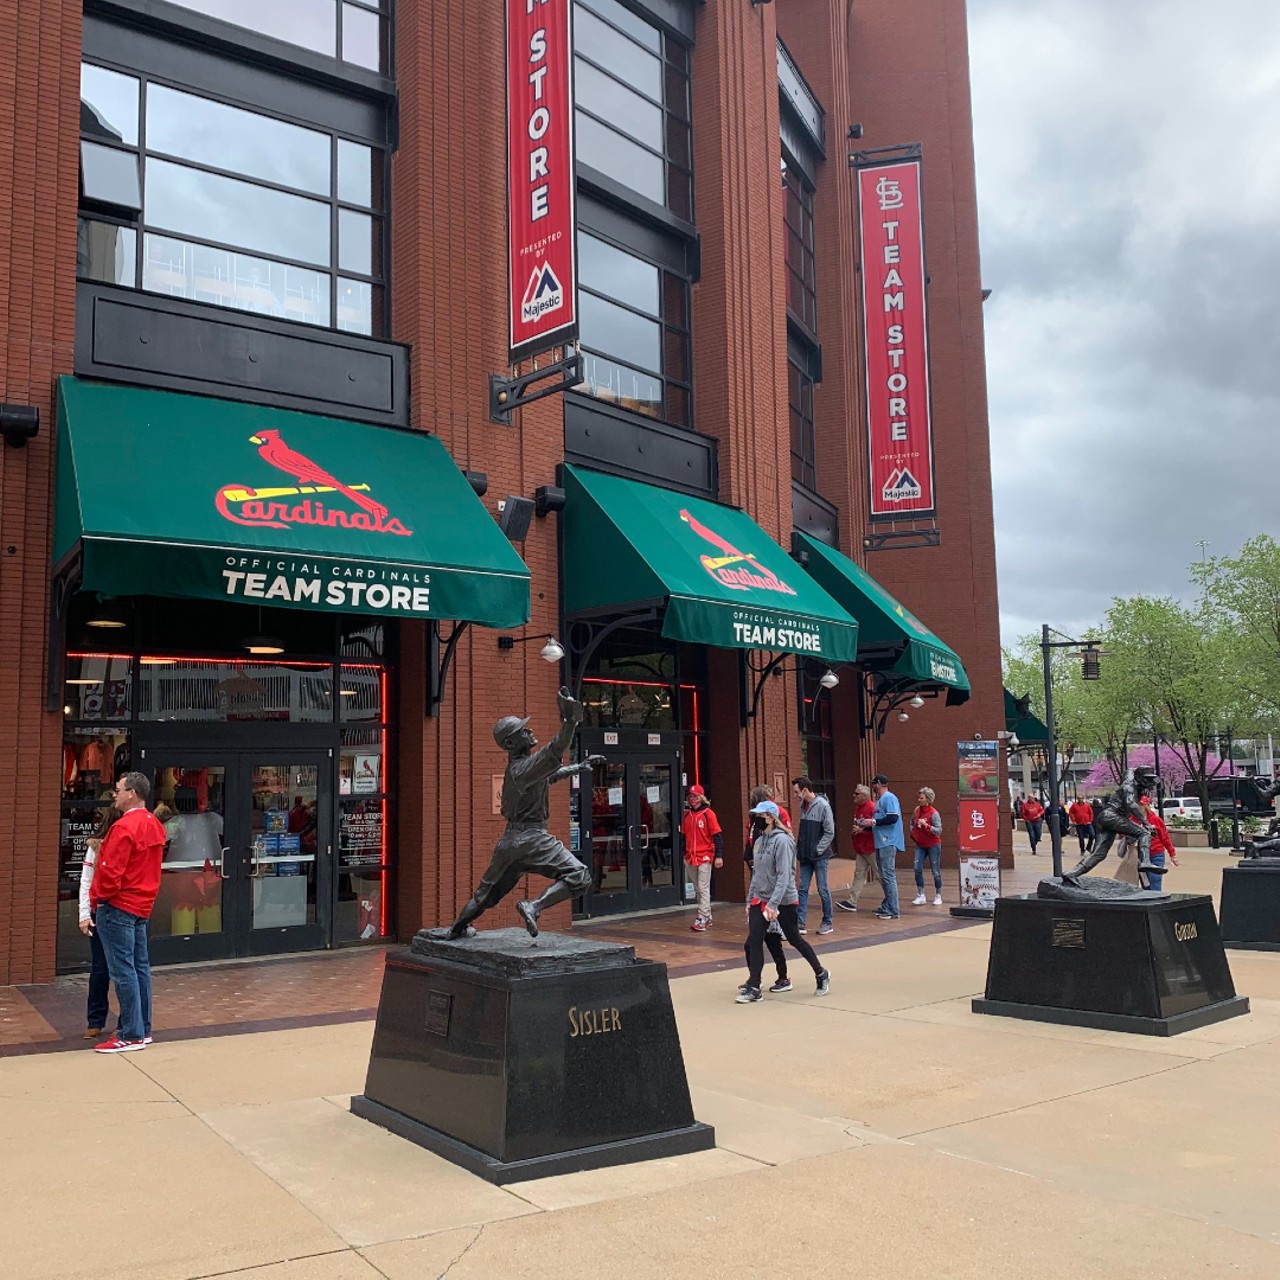 Birds Are Back: St. Louis Cardinals Opening Day 2021 Photos